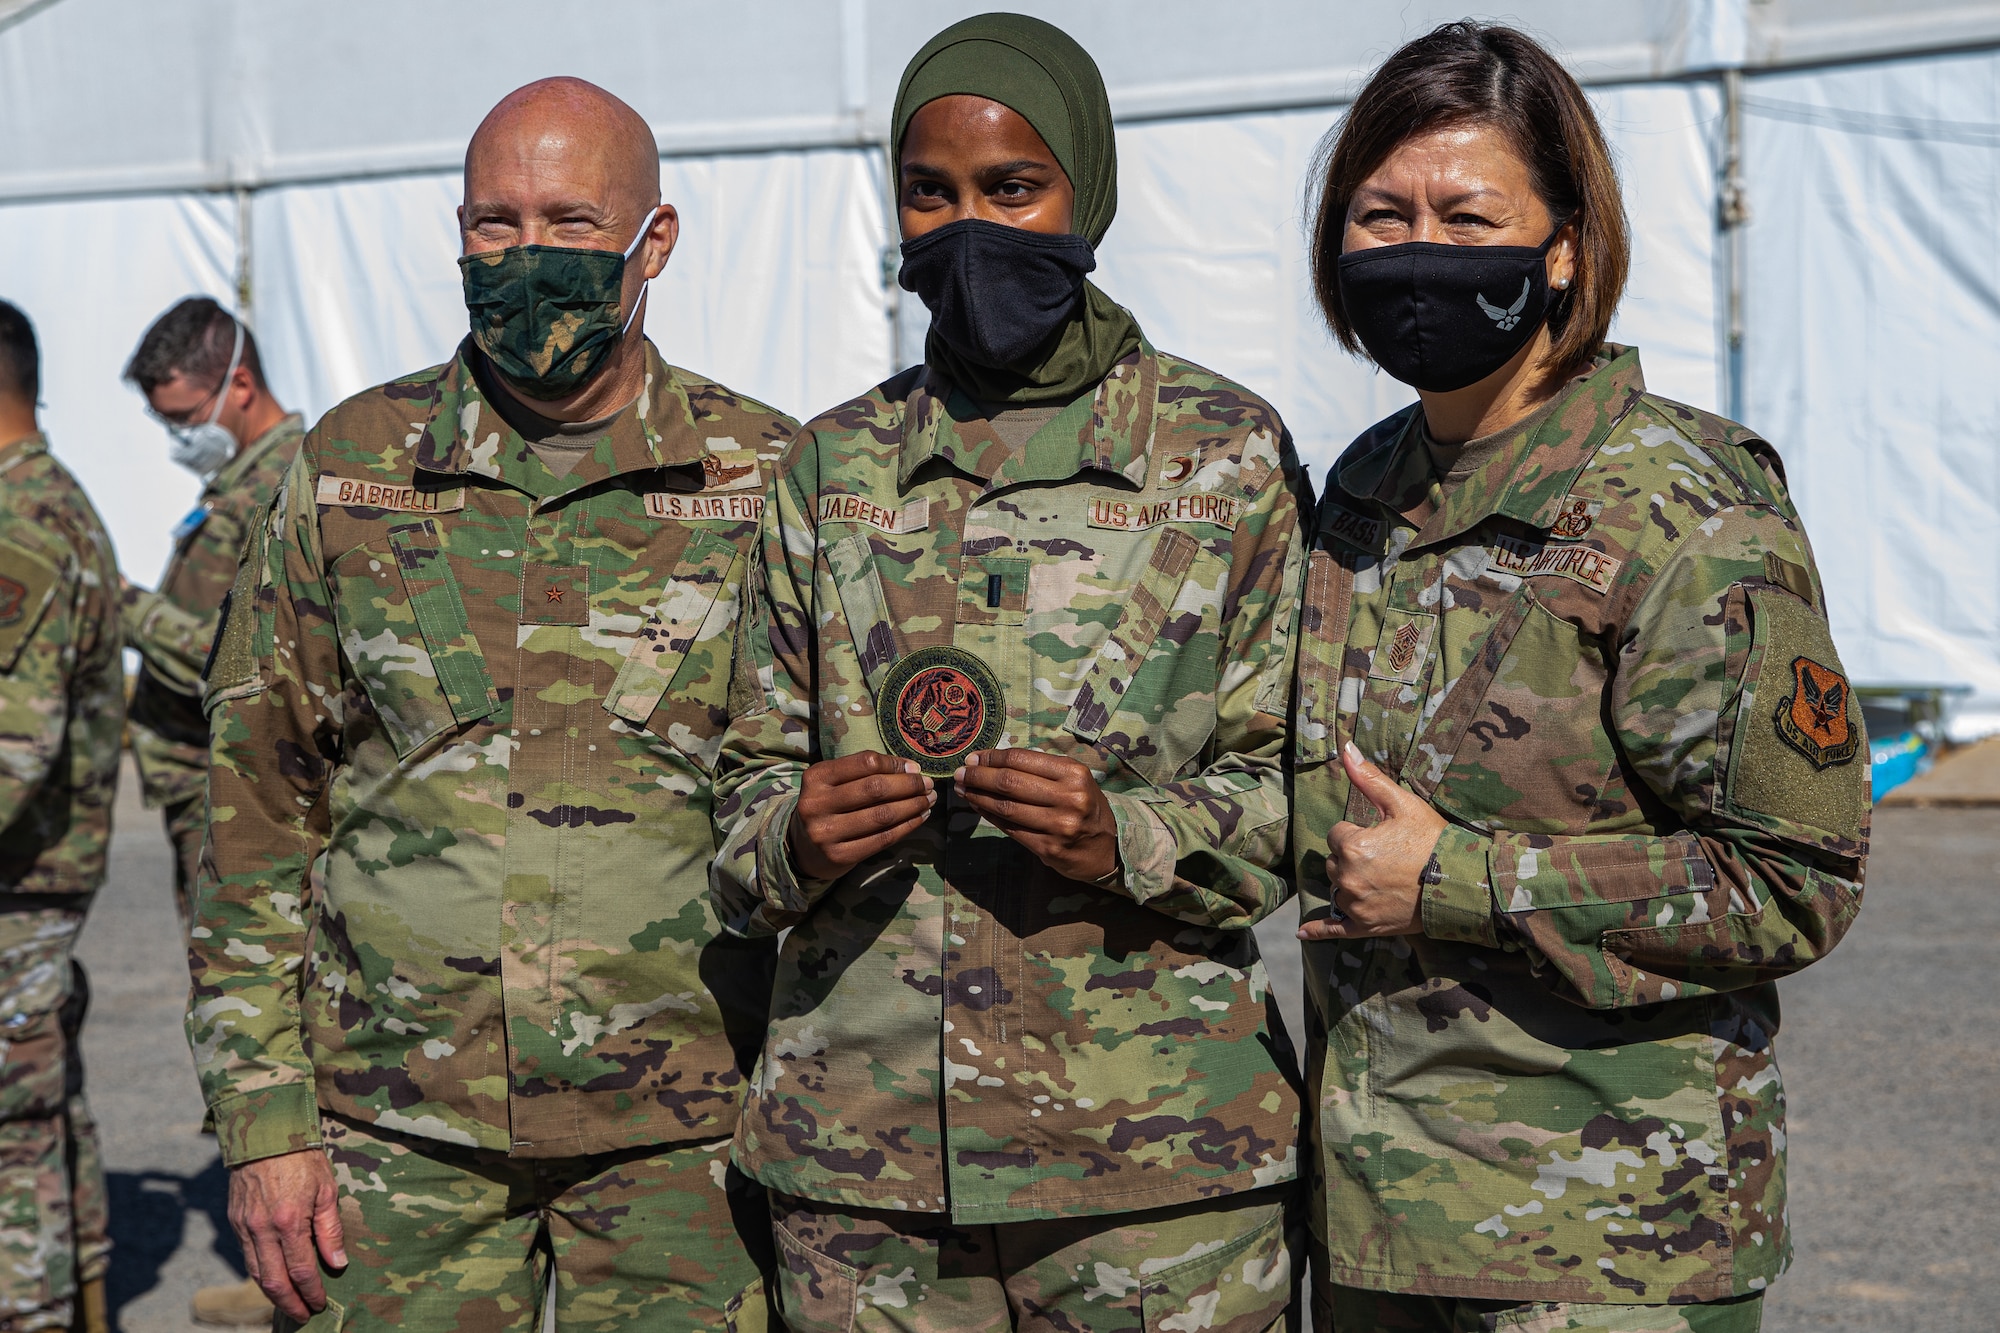 (From left to right) Brig. Gen. Daniel Gabrielli, Task Force-Holloman commander, 1st Lt. Saleha Jabeen, TF-H religious and cultural advisor deployed from Sheppard Air Force Base, Texas and Chief Master Sgt. of the Air Force JoAnne S. Bass pose for photo as part of a visit to Holloman AFB, New Mexico, Oct. 13, 2021. The Department of Defense, through U.S. Northern Command, and in support of the Department of Homeland Security, is providing transportation, temporary housing, medical screening, and general support for at least 50,000 Afghan evacuees at suitable facilities, in permanent or temporary structures, as quickly as possible. This initiative provides Afghan personnel essential support at secure locations outside Afghanistan. (U.S. Army photo by Pfc. Anthony Sanchez)